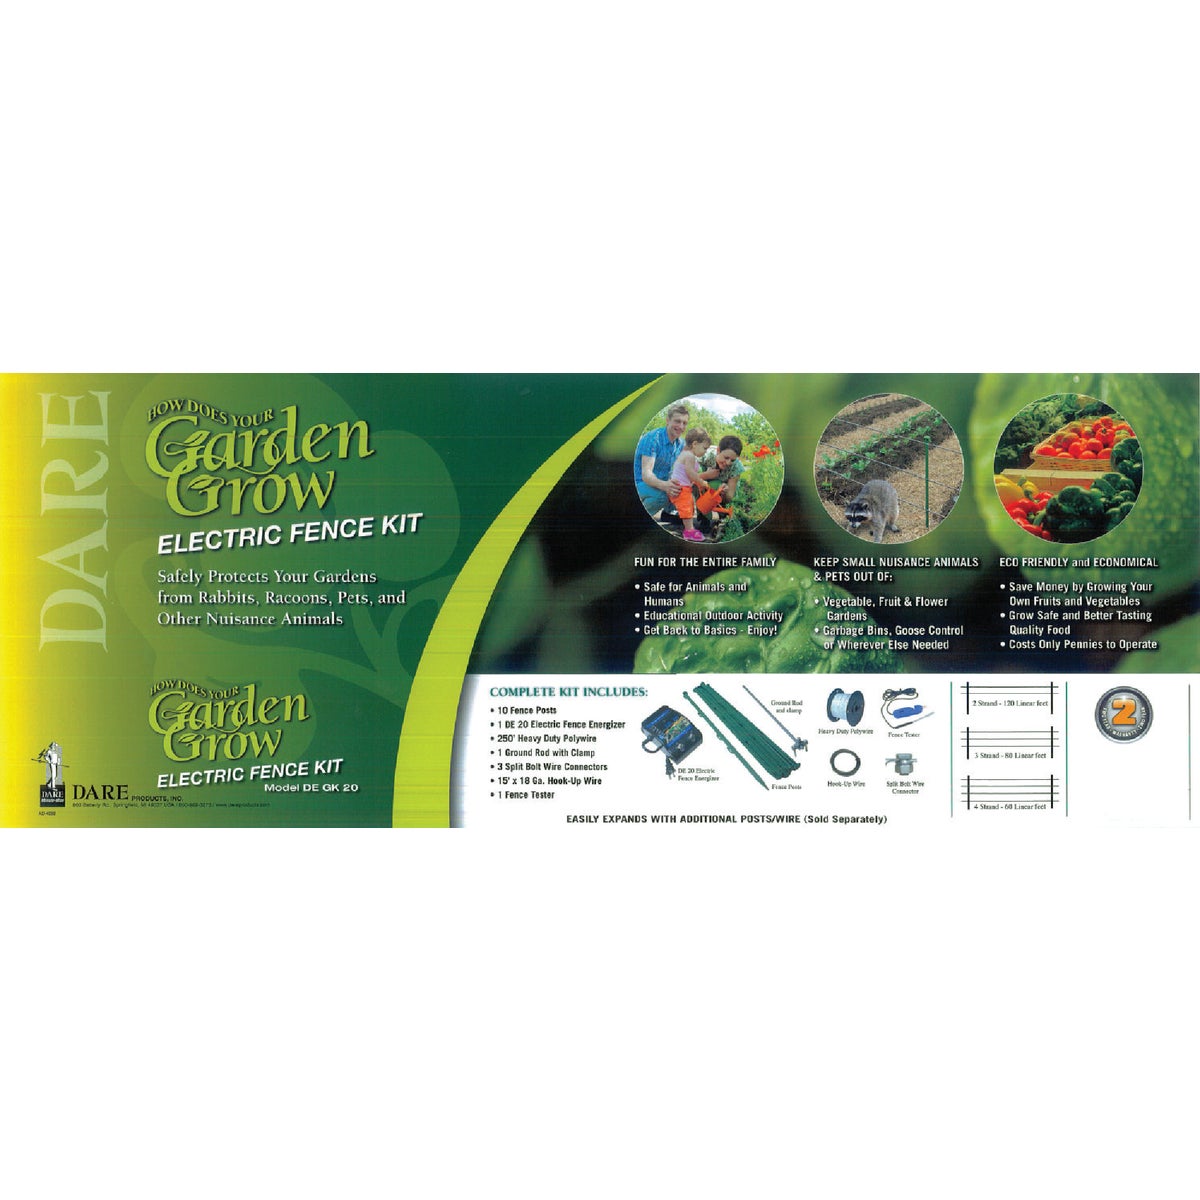 Item 743216, Garden electric fence kit safely keeps rabbits, raccoons, pets, and other 